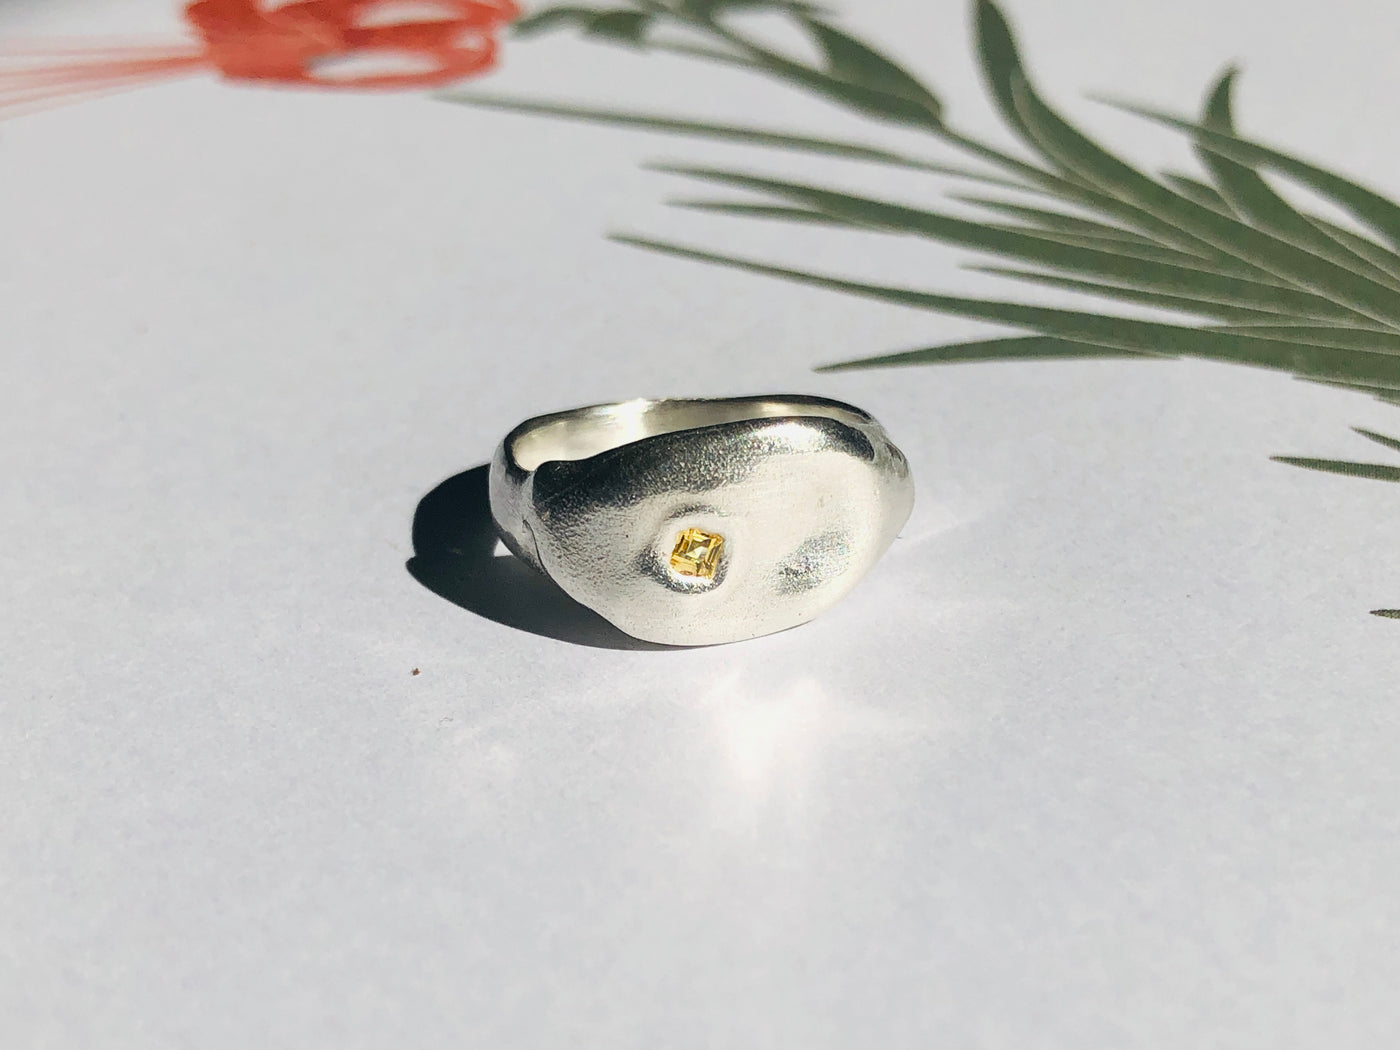 Sharlala Jewellery Melted Signet Yellow Sapphire Ring Sterling Silver - Radical Giving